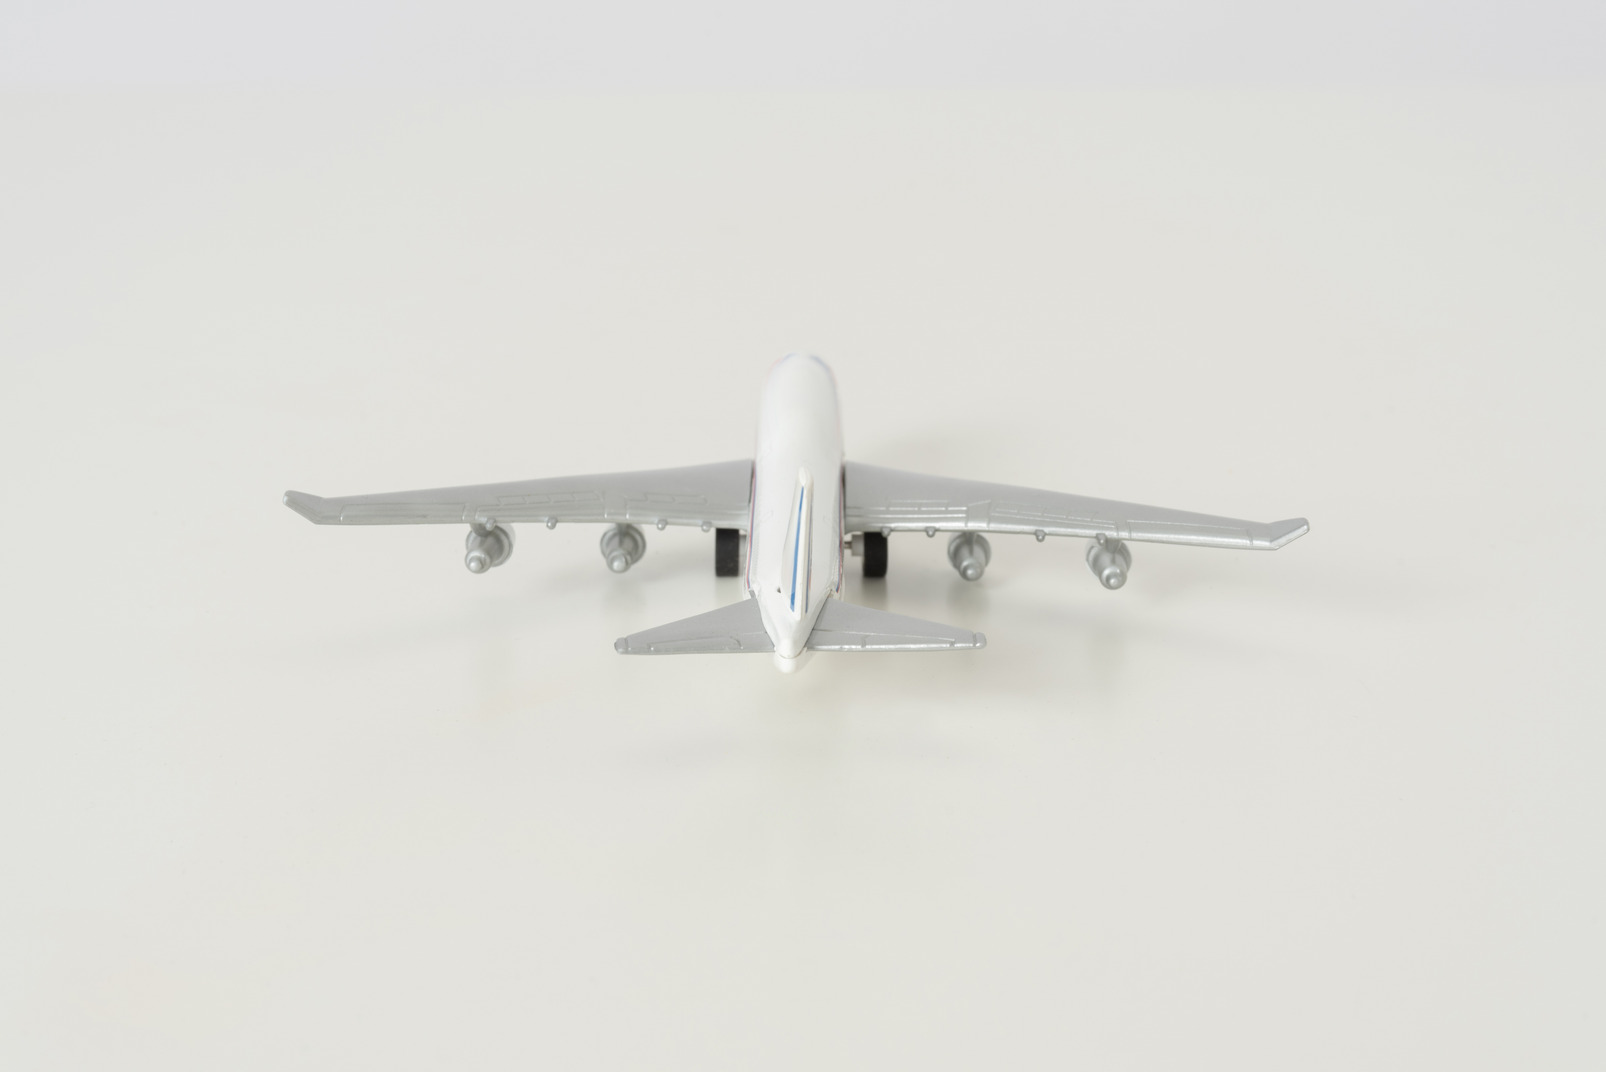 Toy airplane photographed from the back on grey background